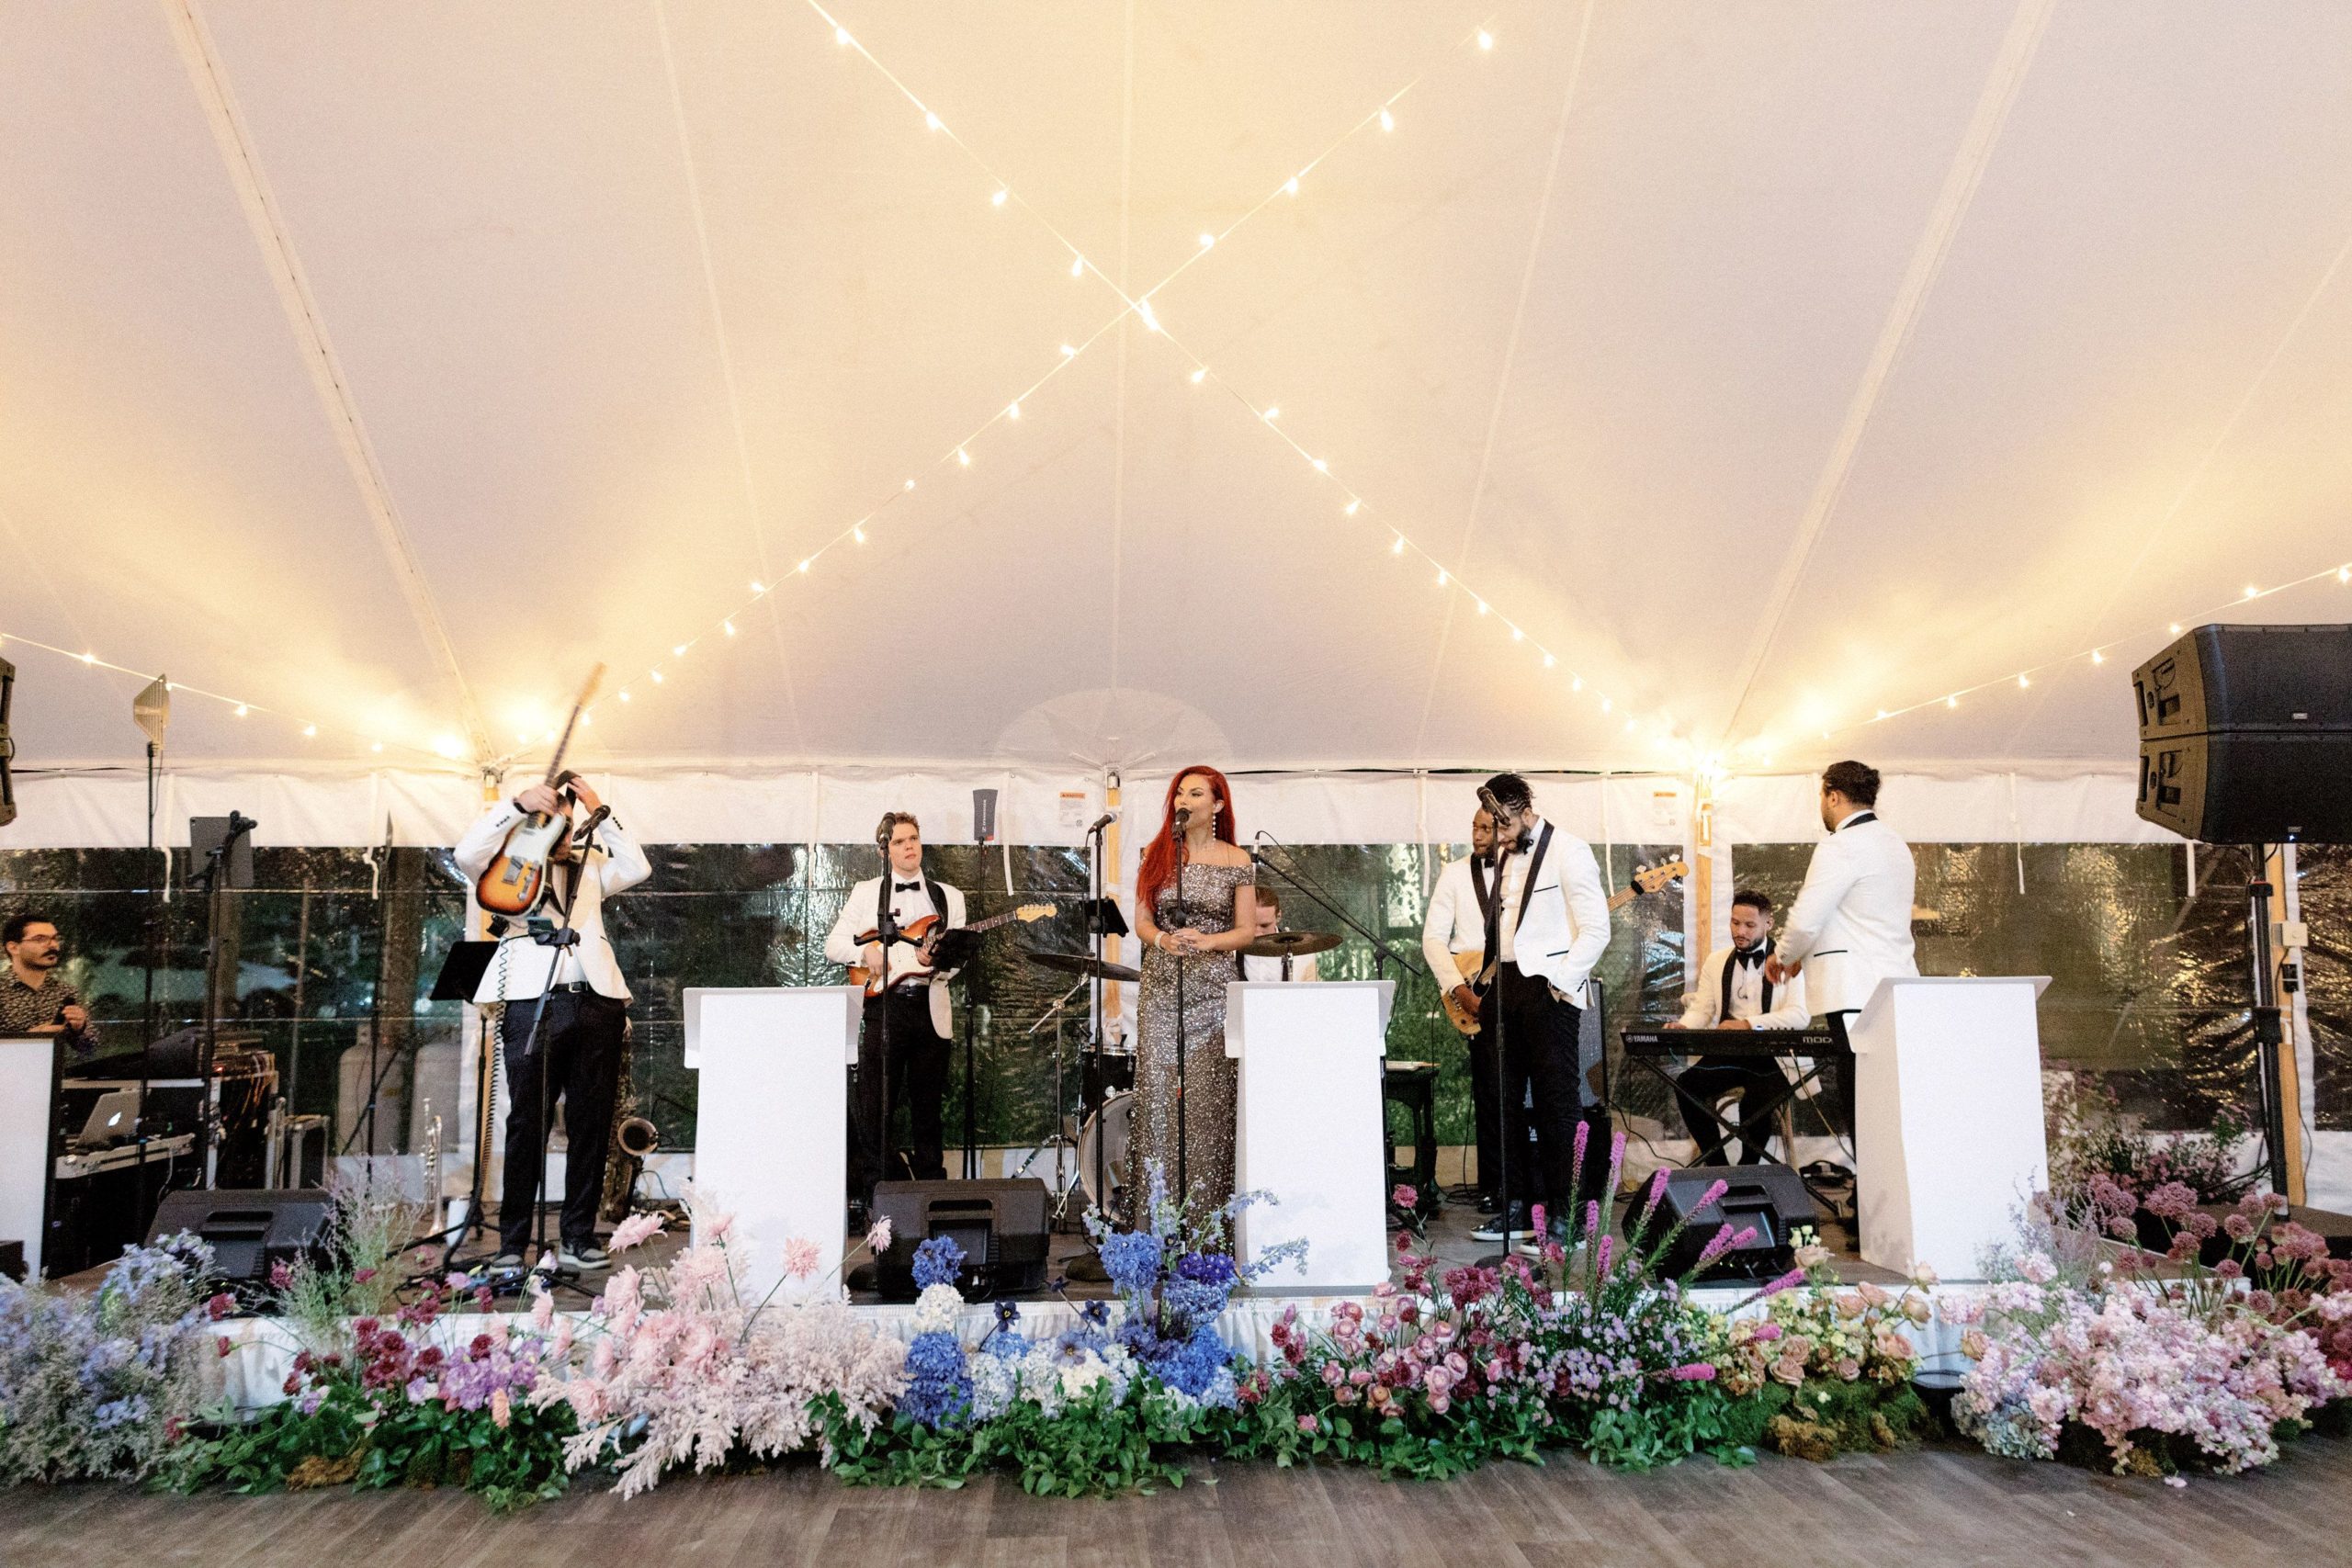 The band is playing on the stage for a wedding at The Ausable Club. Best NYC wedding vendors Image by Jenny Fu Studio.